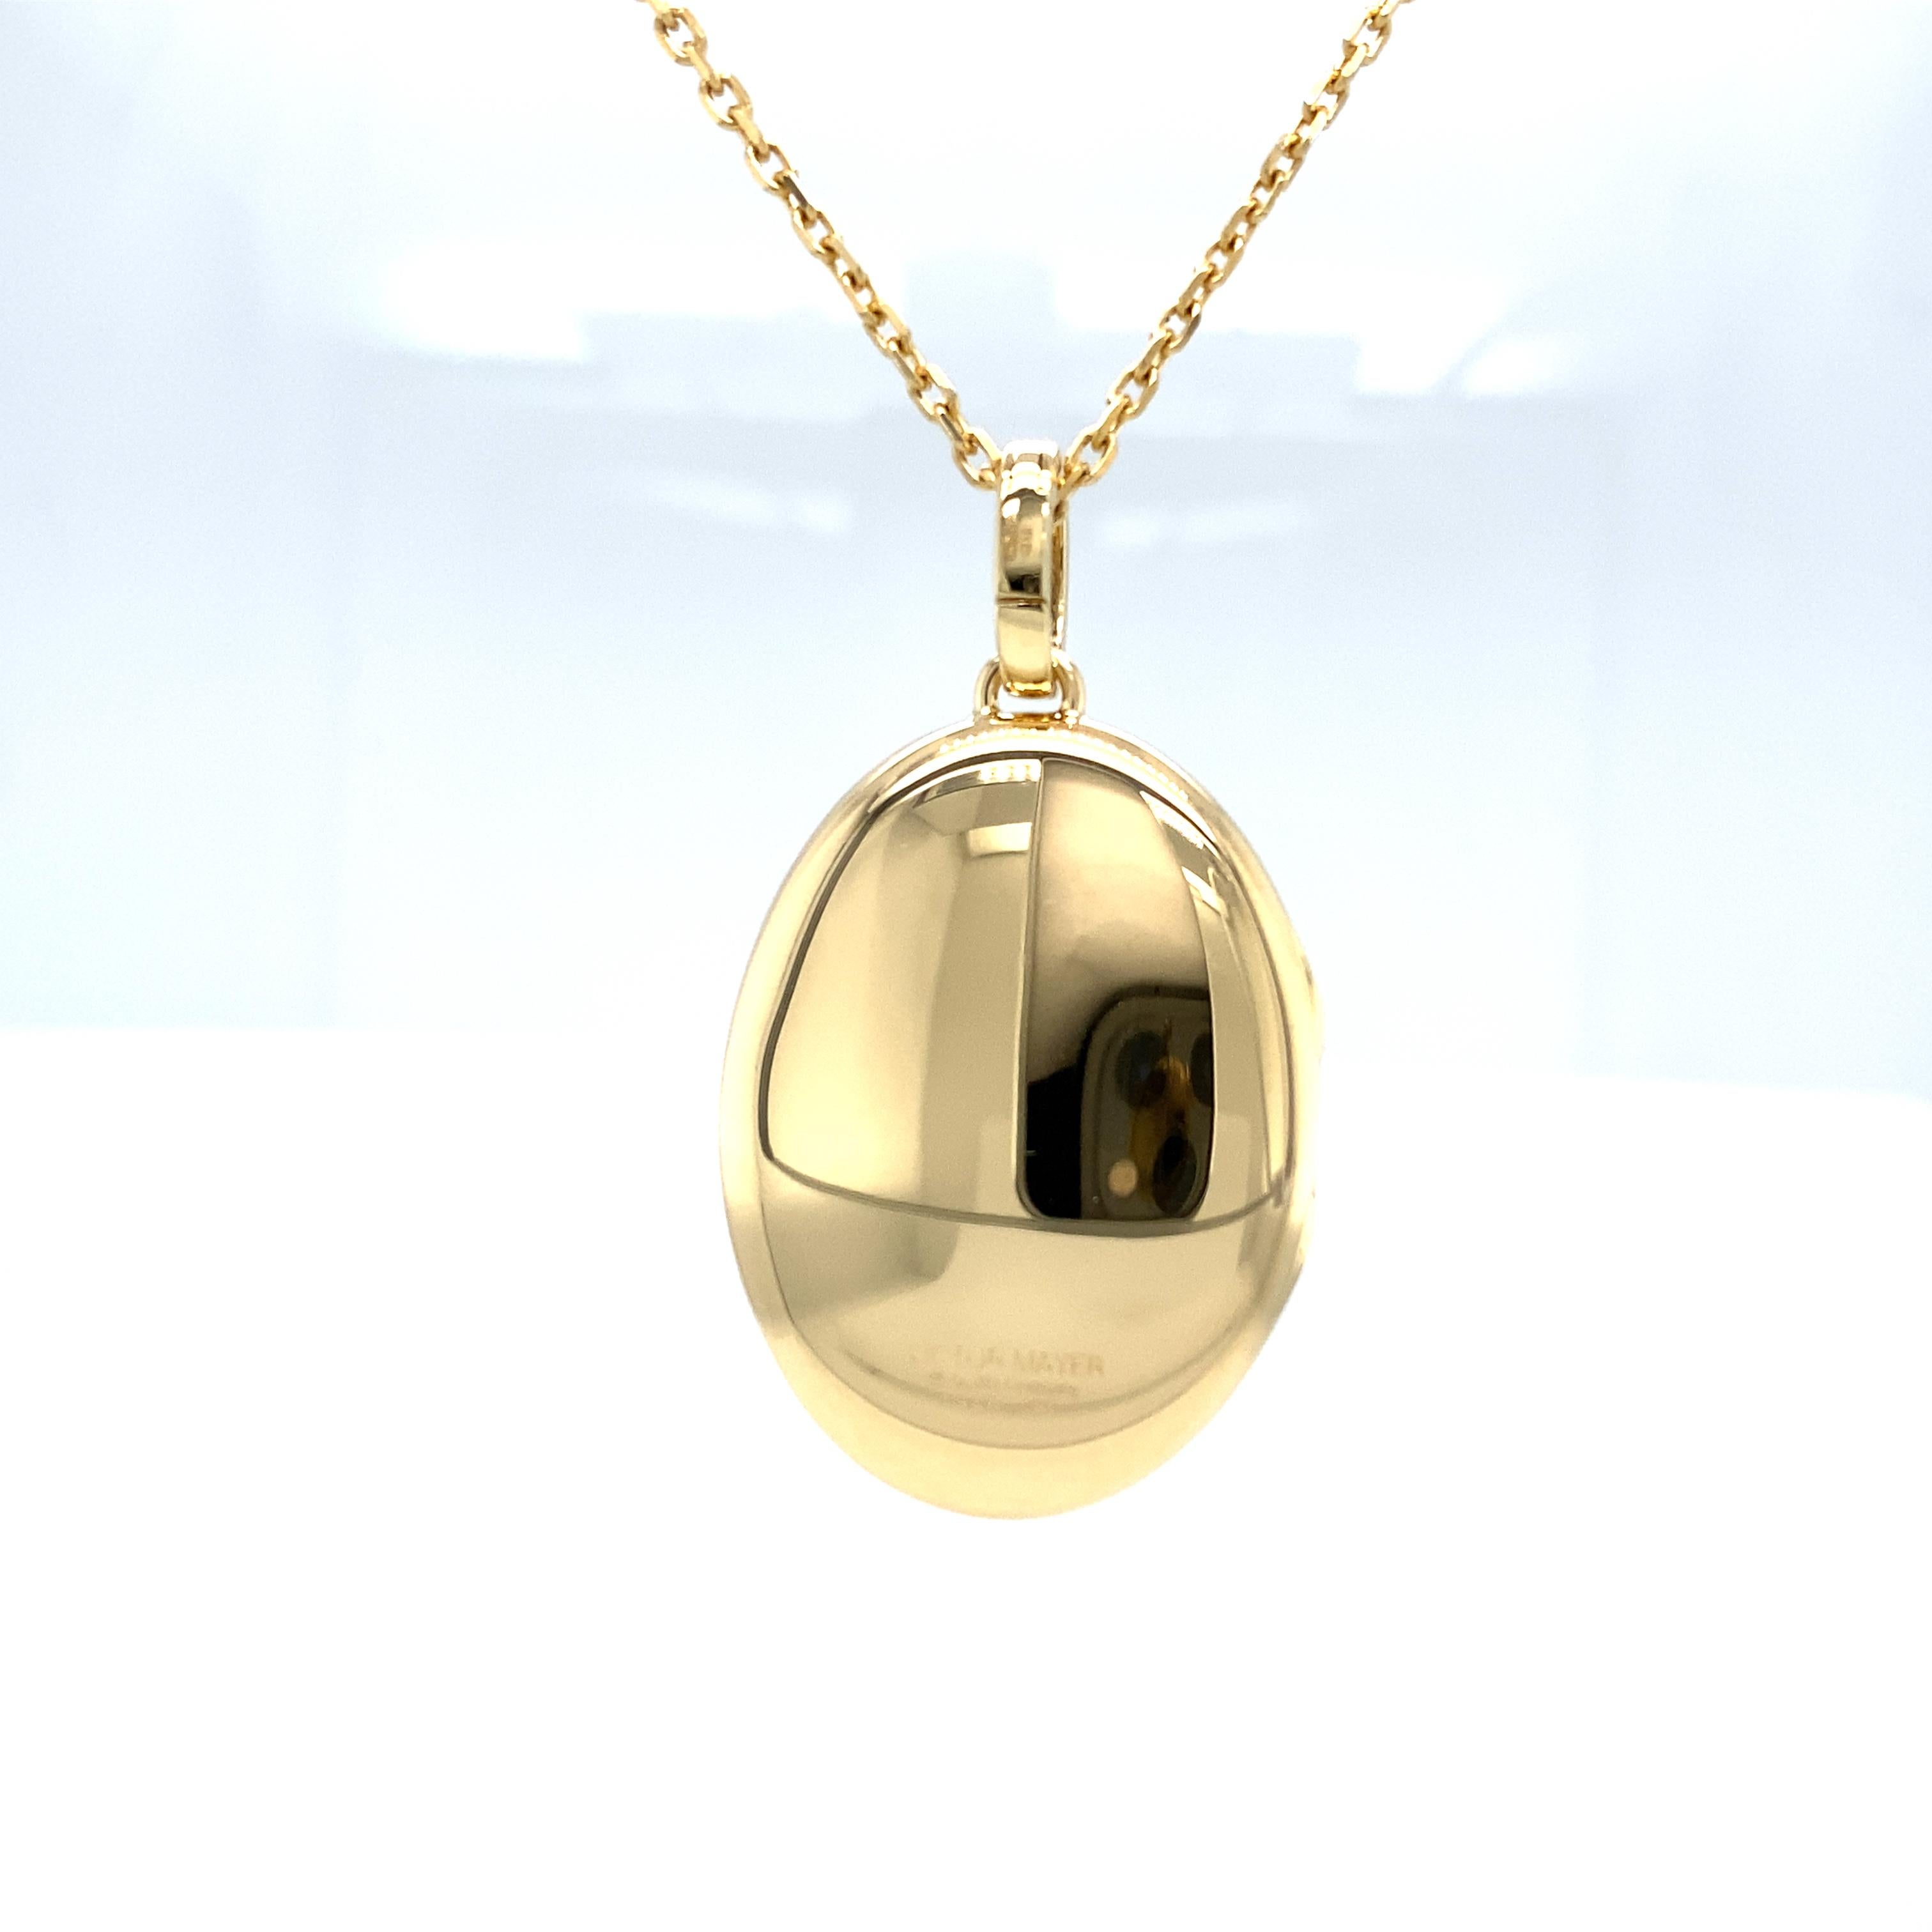 Oval Polished Locket Pendant Necklace - 18k Yellow Gold - 9 Diamonds 0.14ct G VS For Sale 4